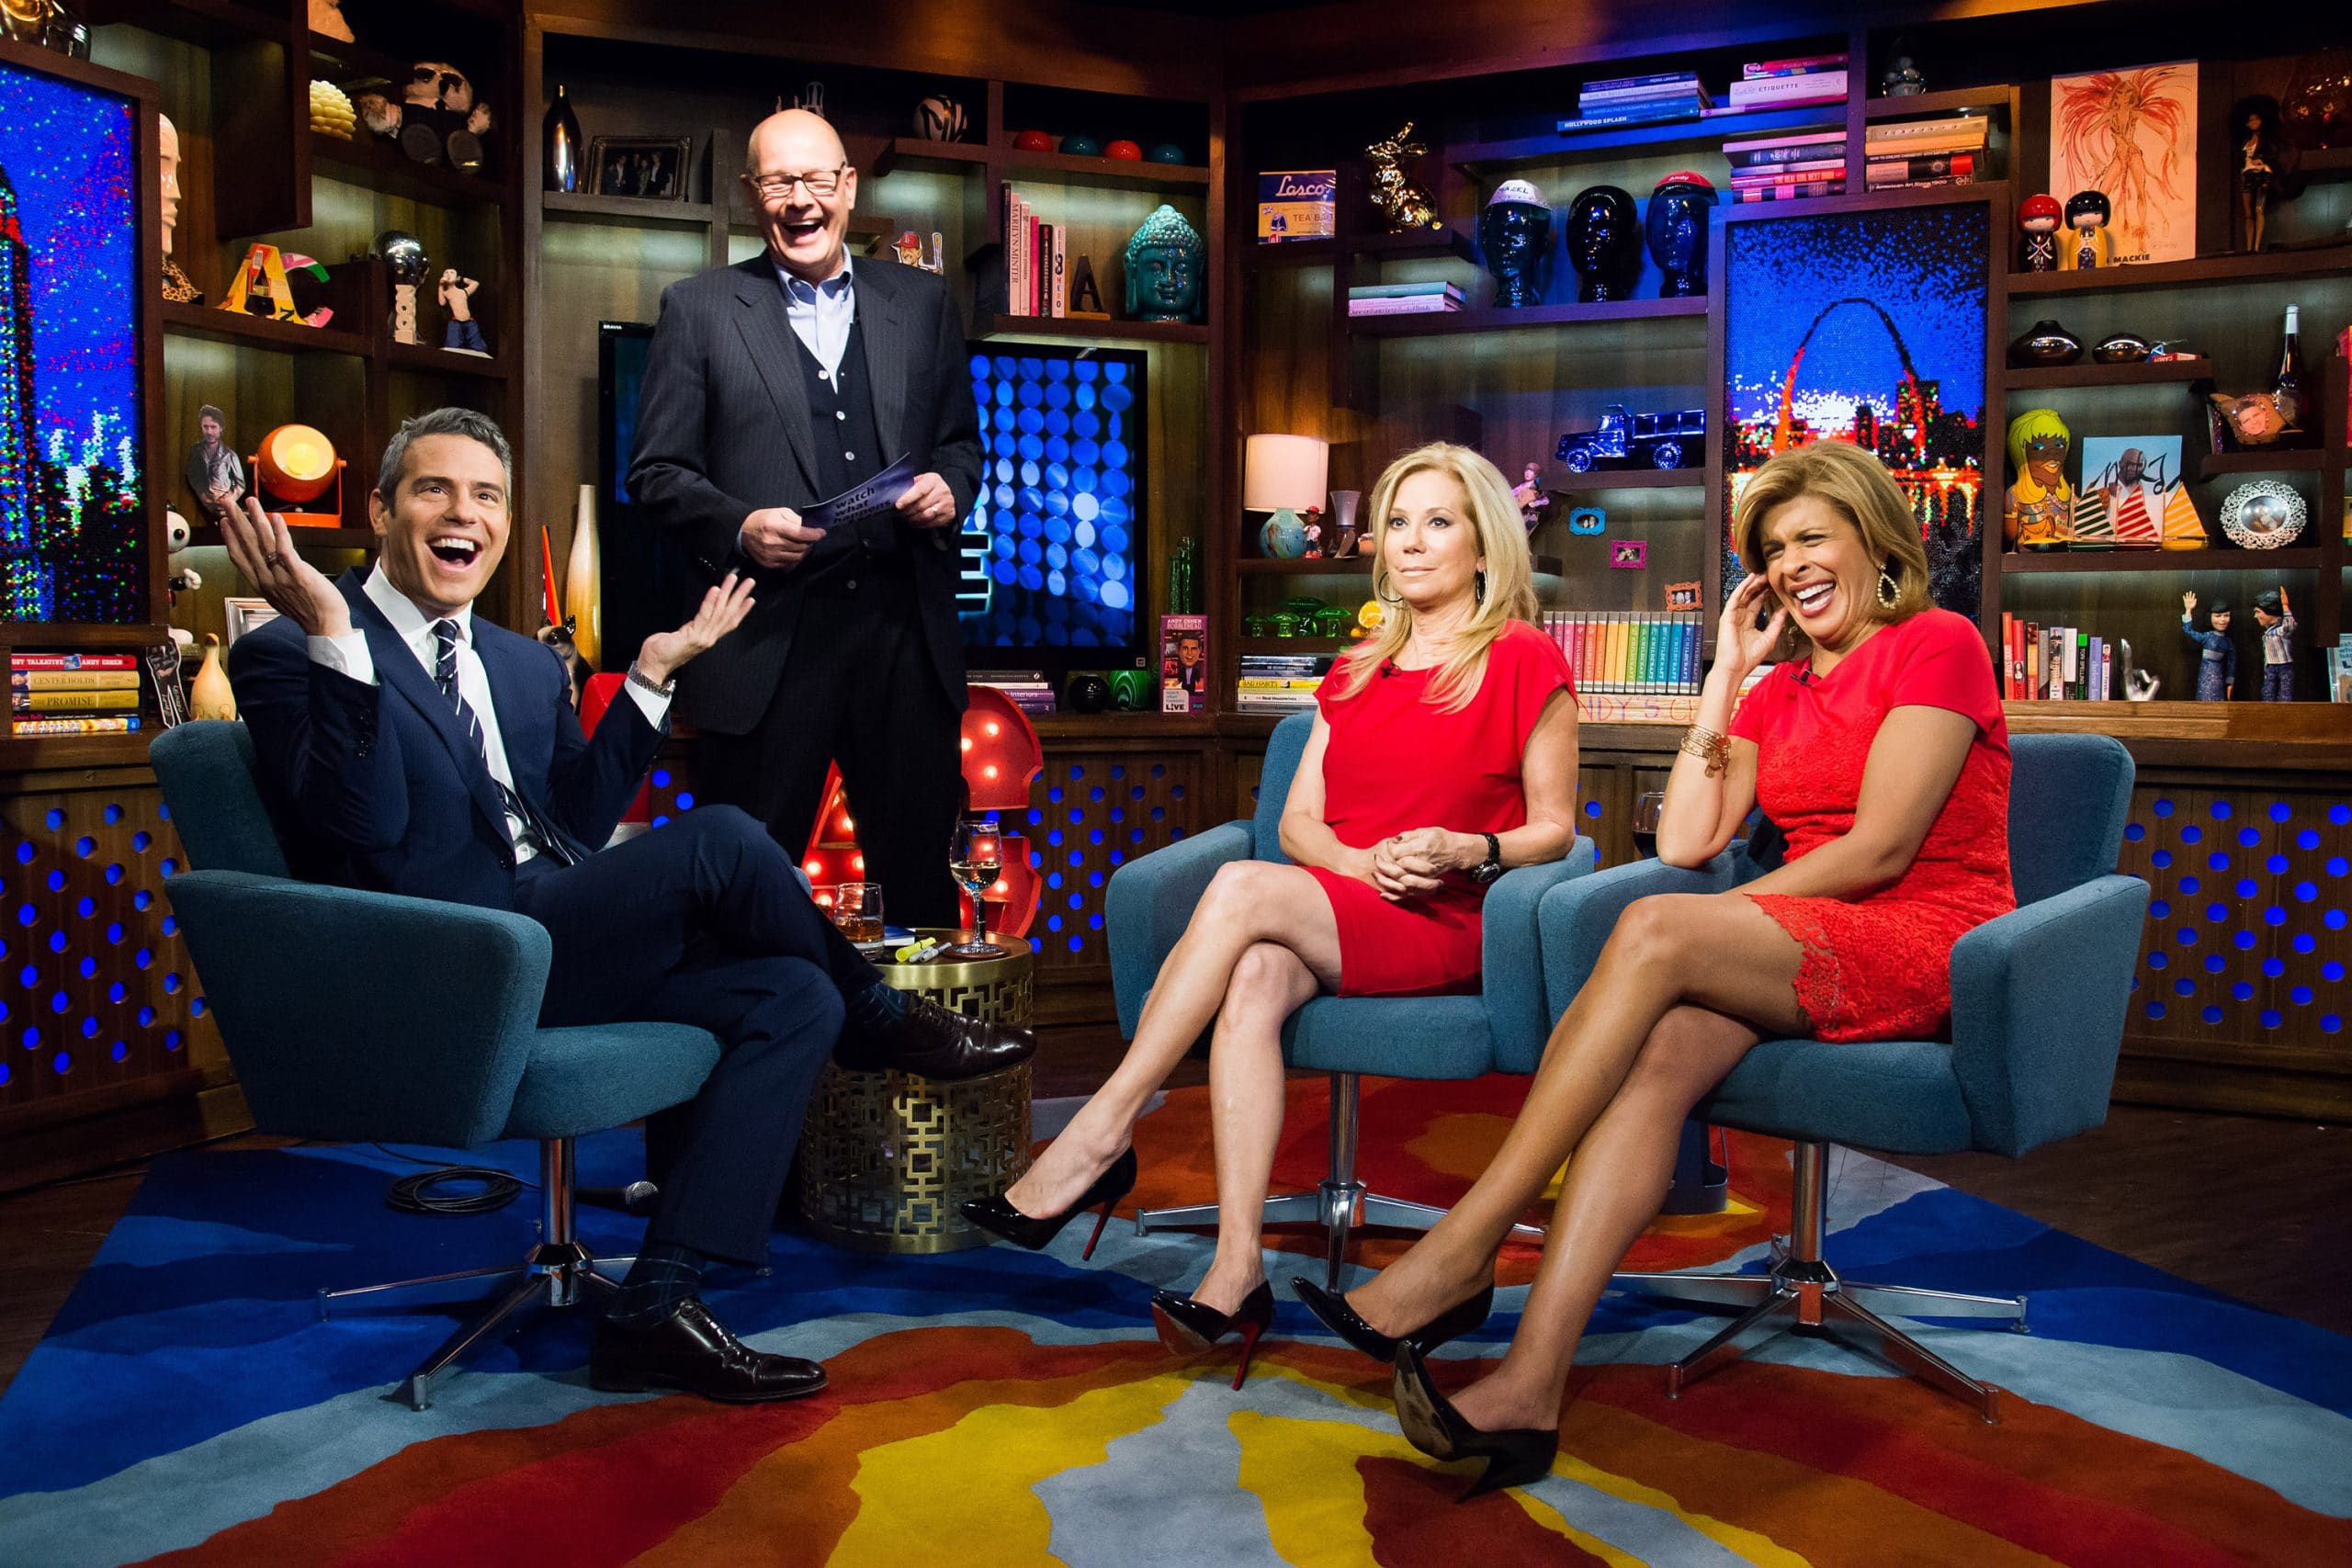 WATCH WHAT HAPPENS LIVE, (from left): host Andy Cohen, Harry Smith, Kathie Lee Gifford, Hoda Kotb, 'Guests: Hoda Kotb &amp; Kathie Lee Gifford'